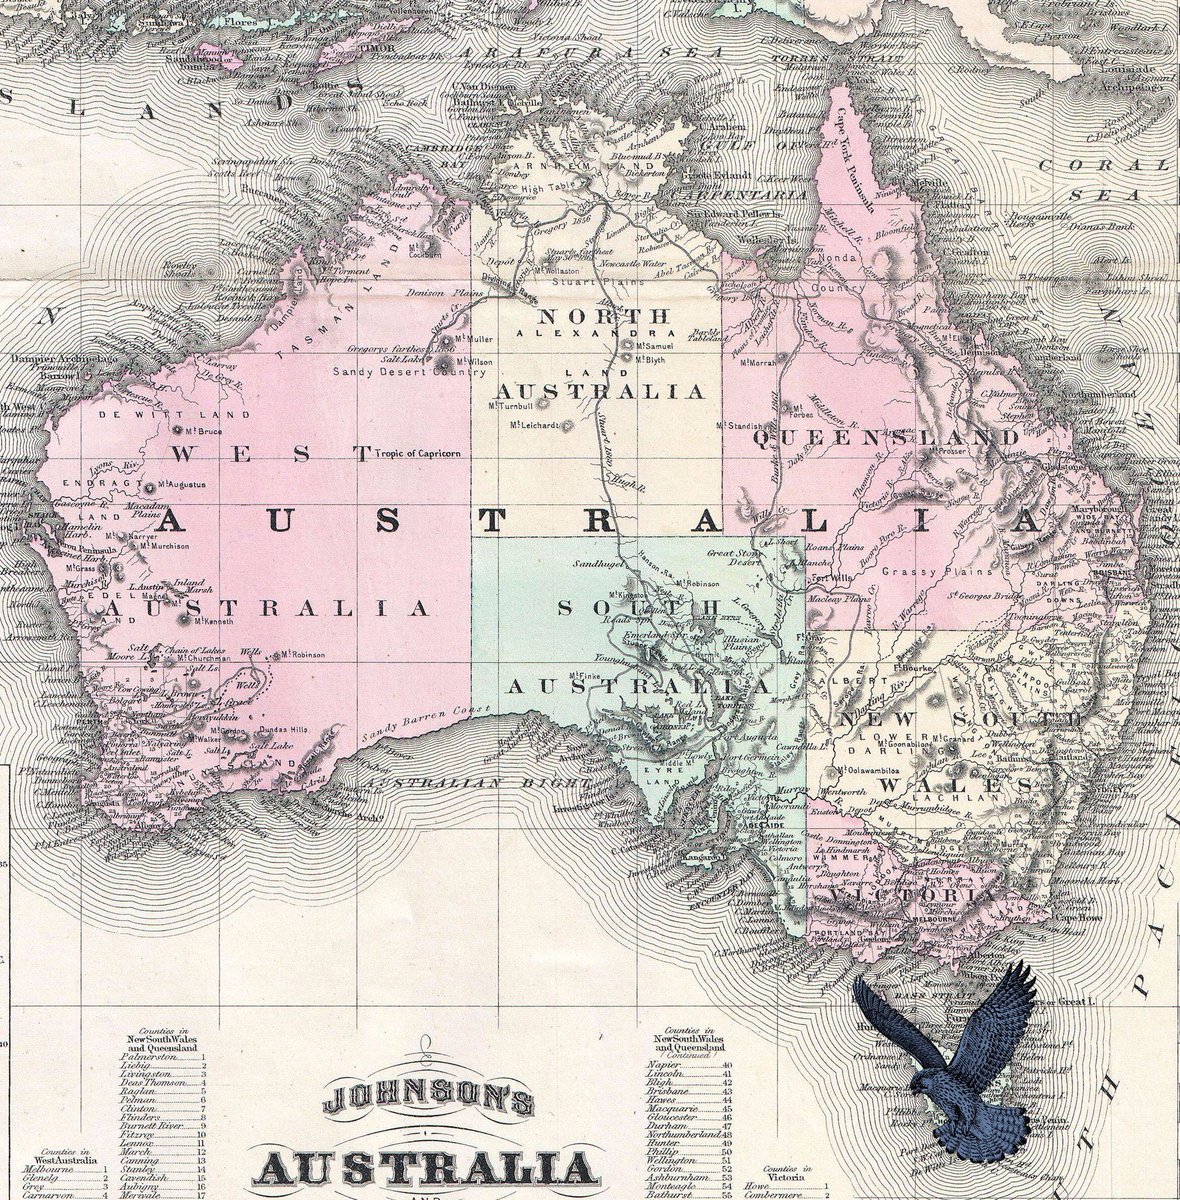 Tasmania was known as Van Diemen’s Land until 1856. The island became so well known as a penal colony in the 19th century that VANDEMONIANISM became another word for criminally bad behaviour.